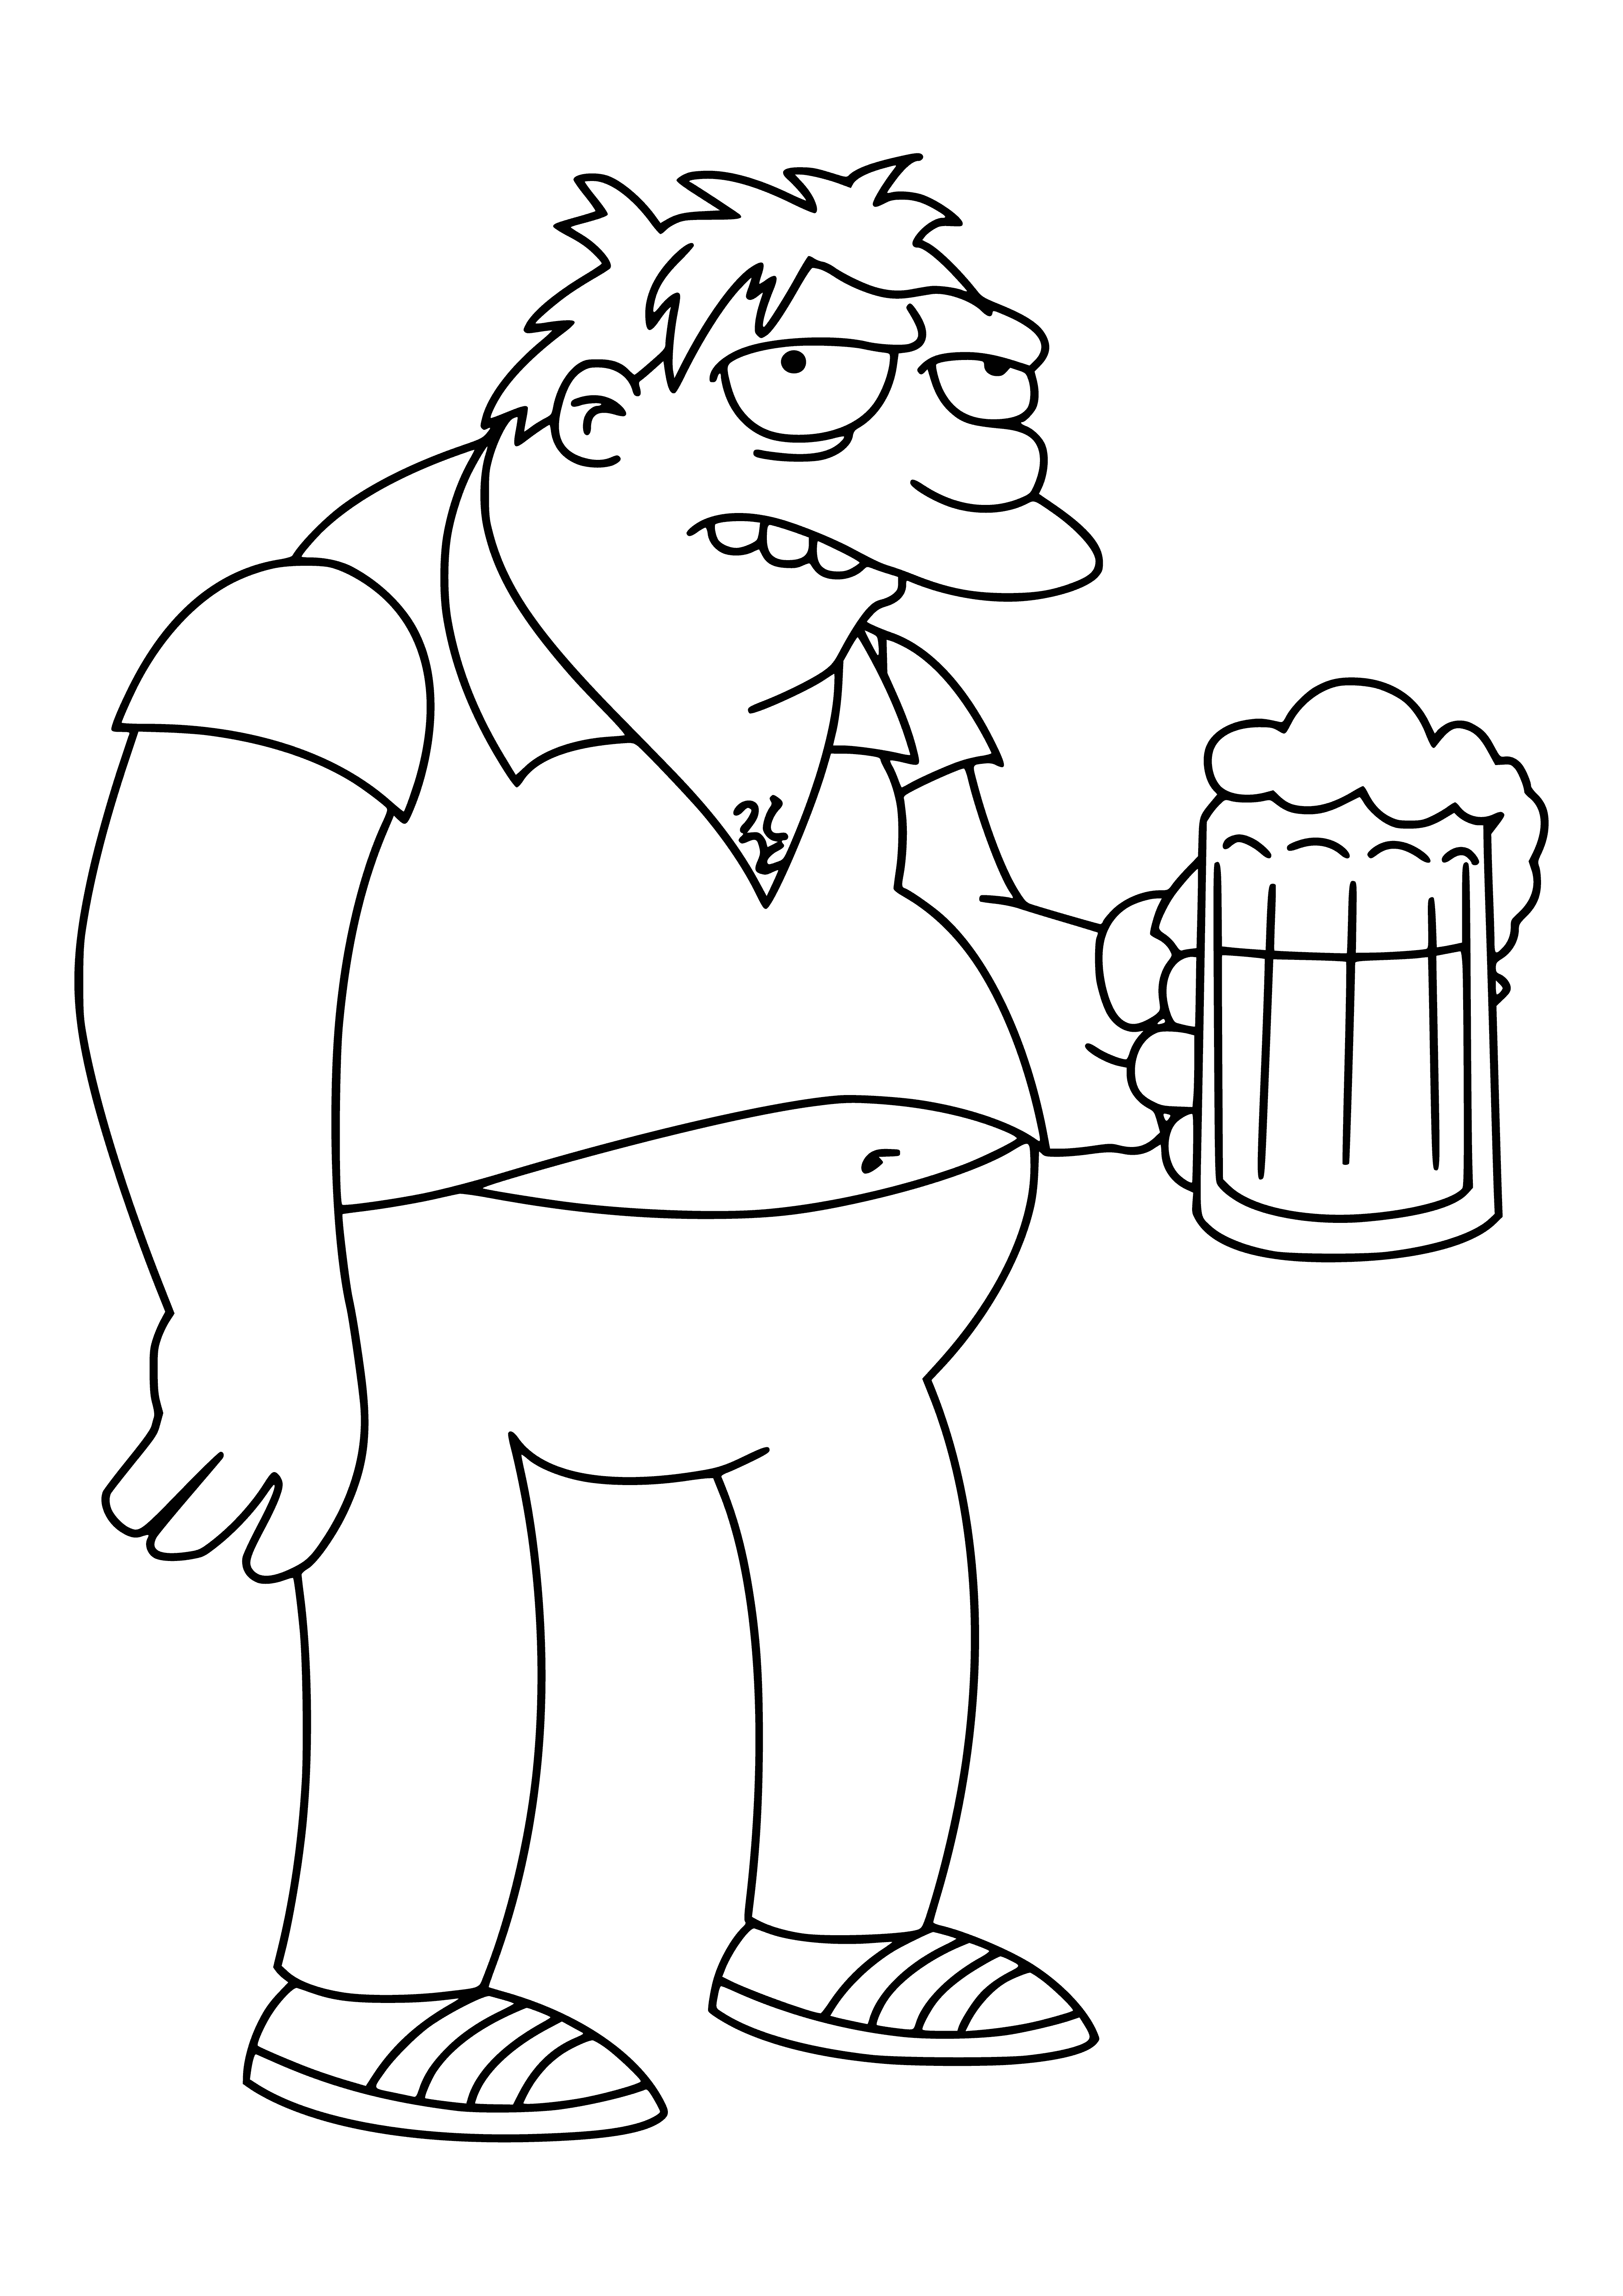 coloring page: Barney Gumble is Springfield's beloved, dishevelled drunk, who can be found wandering or passed out in alleys, wearing a ratty sweater and sporting a balding head and beer belly.